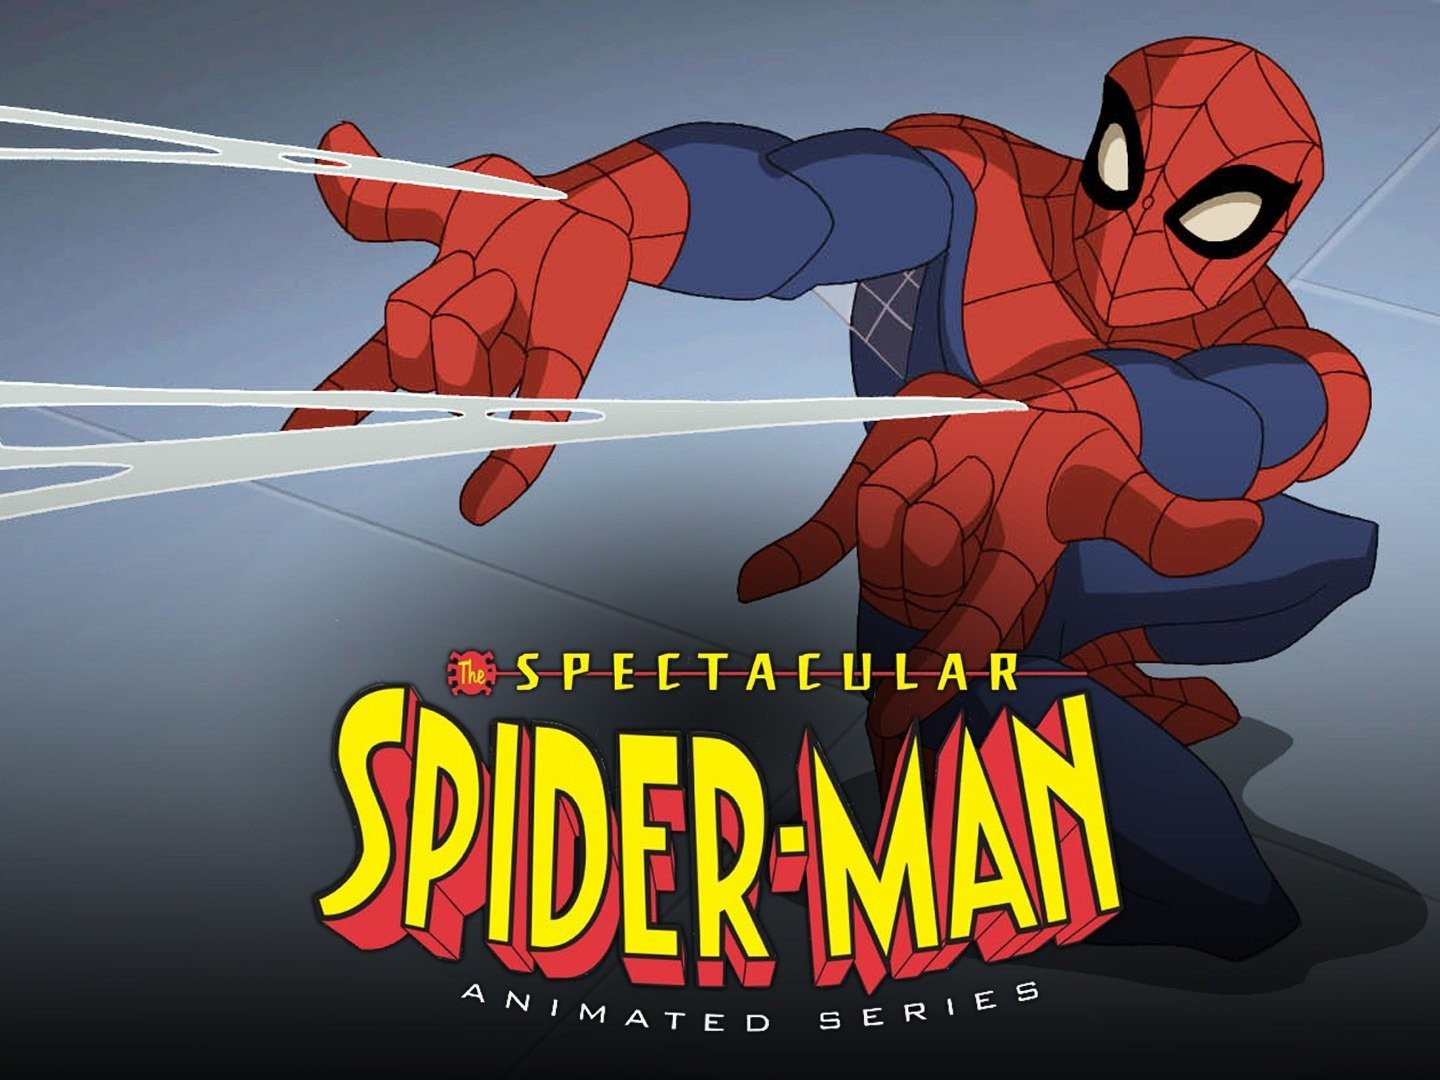 New Spider Man movie in 2017  The Spectacular